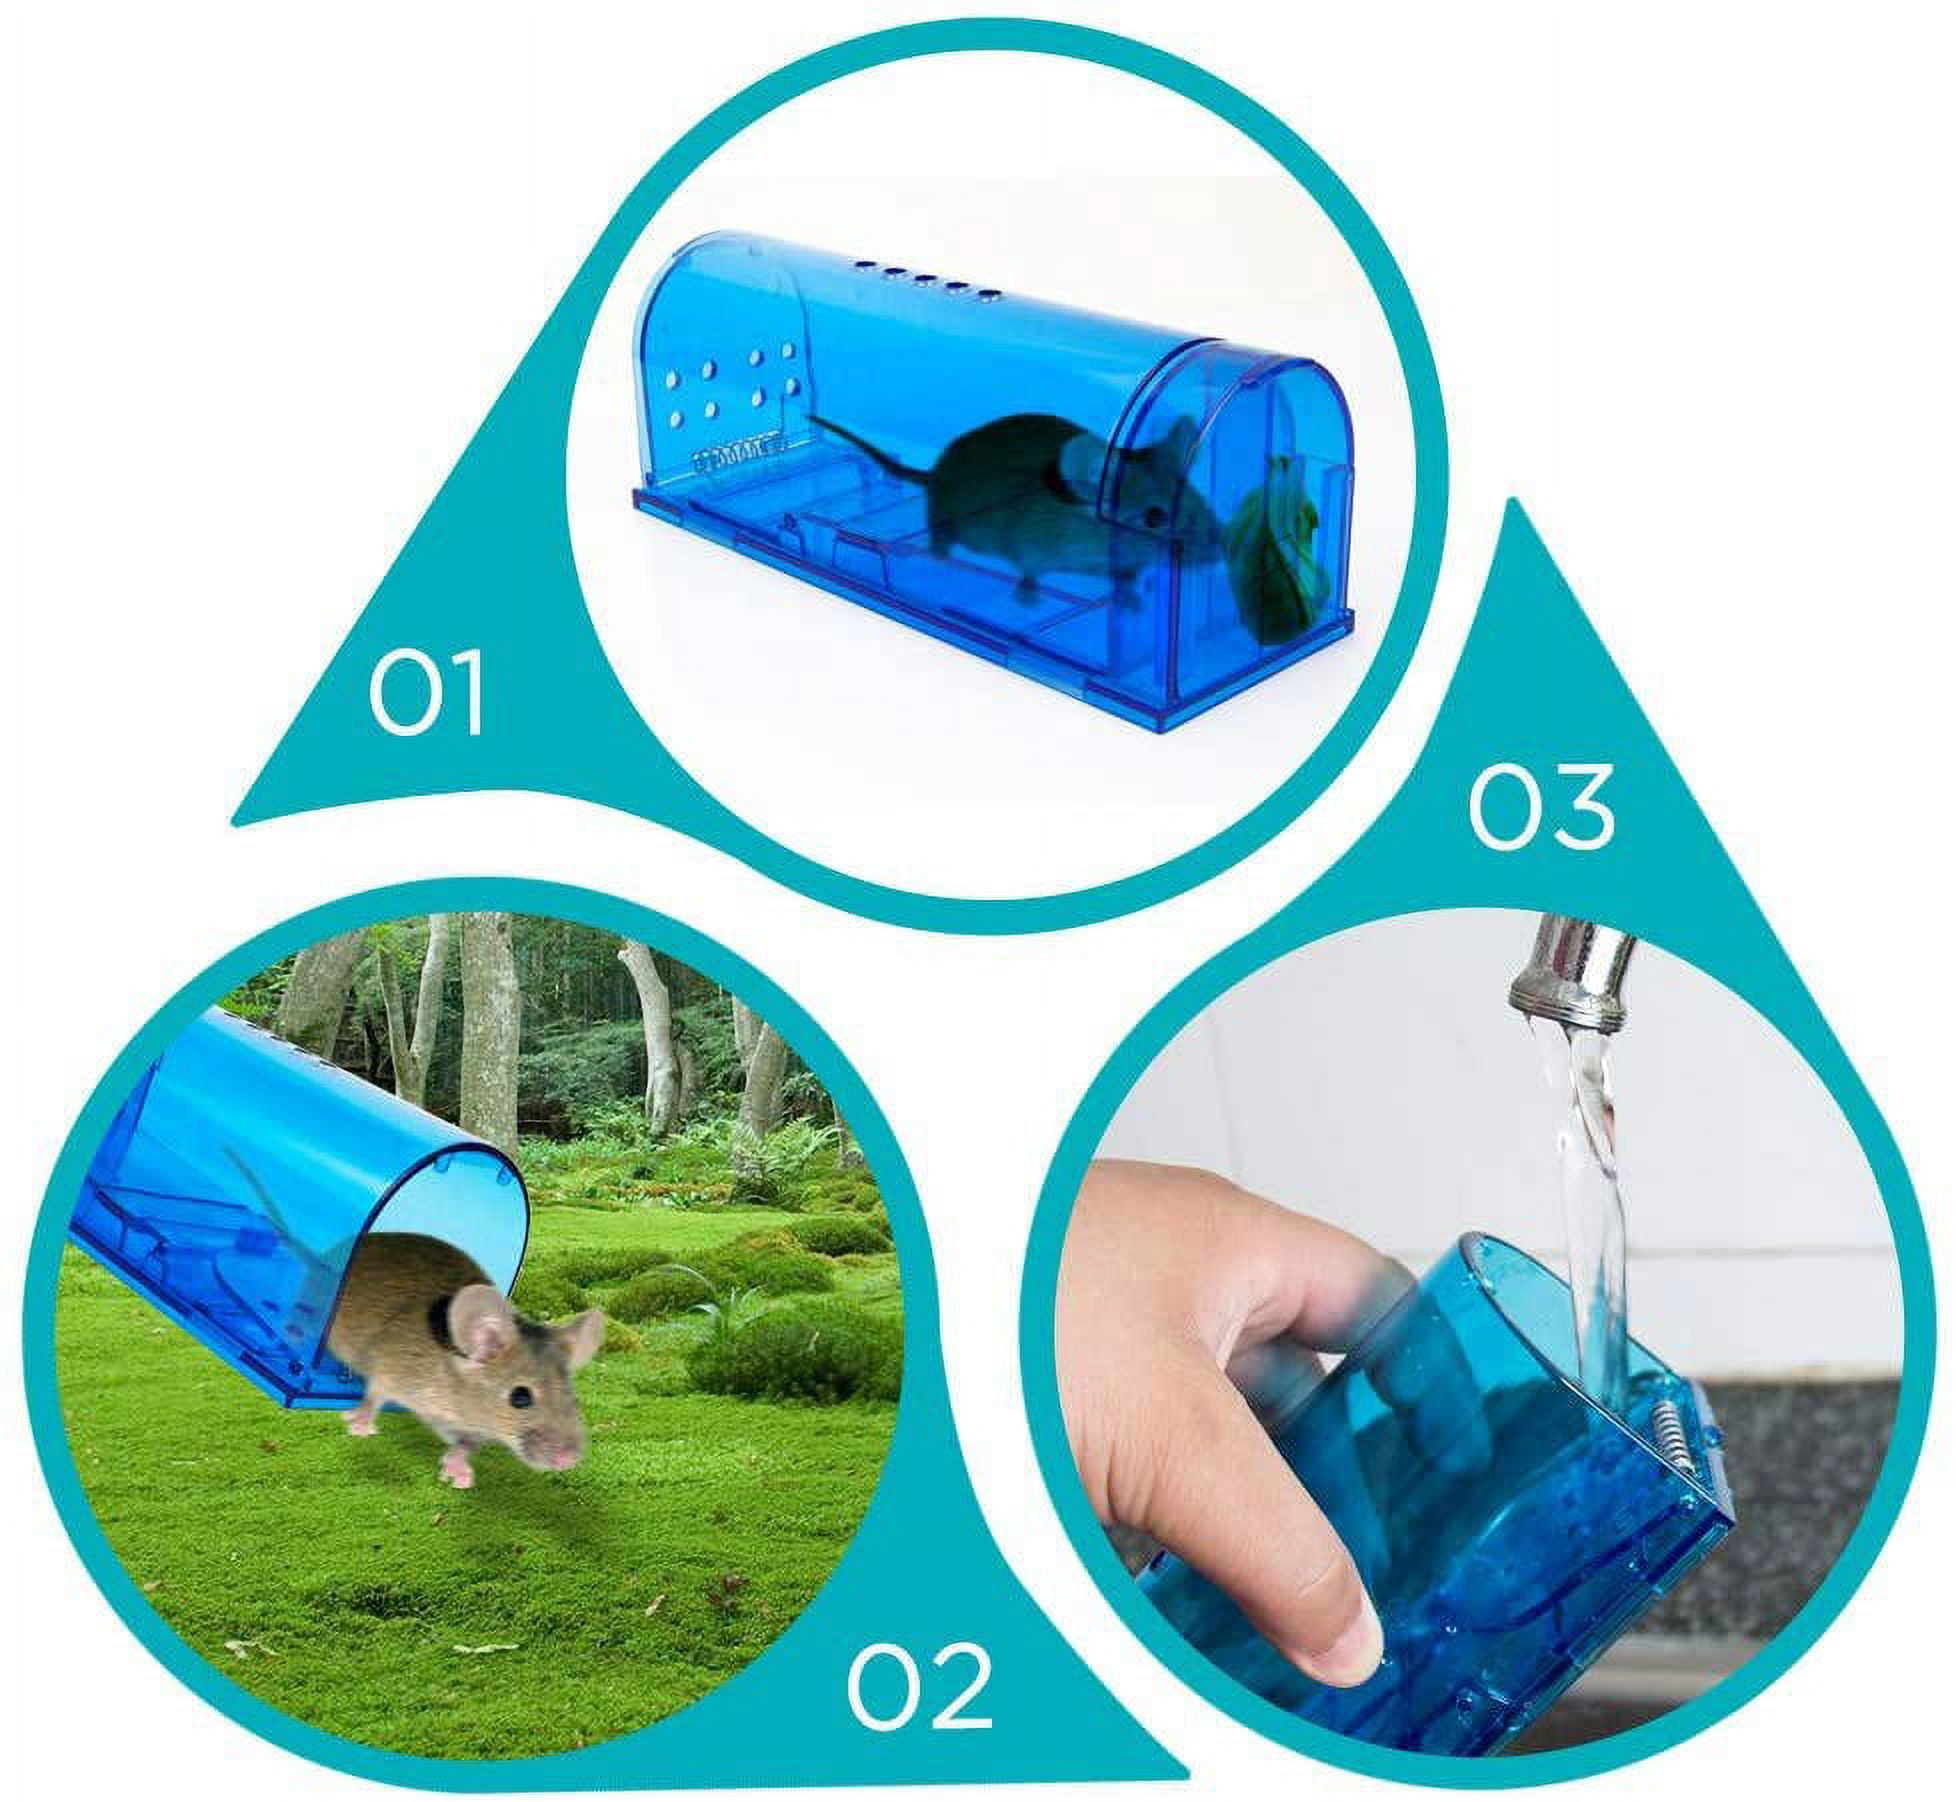 Kydely Humane Mouse Traps 2 Pcs Live Catch and Release Mousetrap New(Green), Size: 7.1 x 5.3 x 2.6